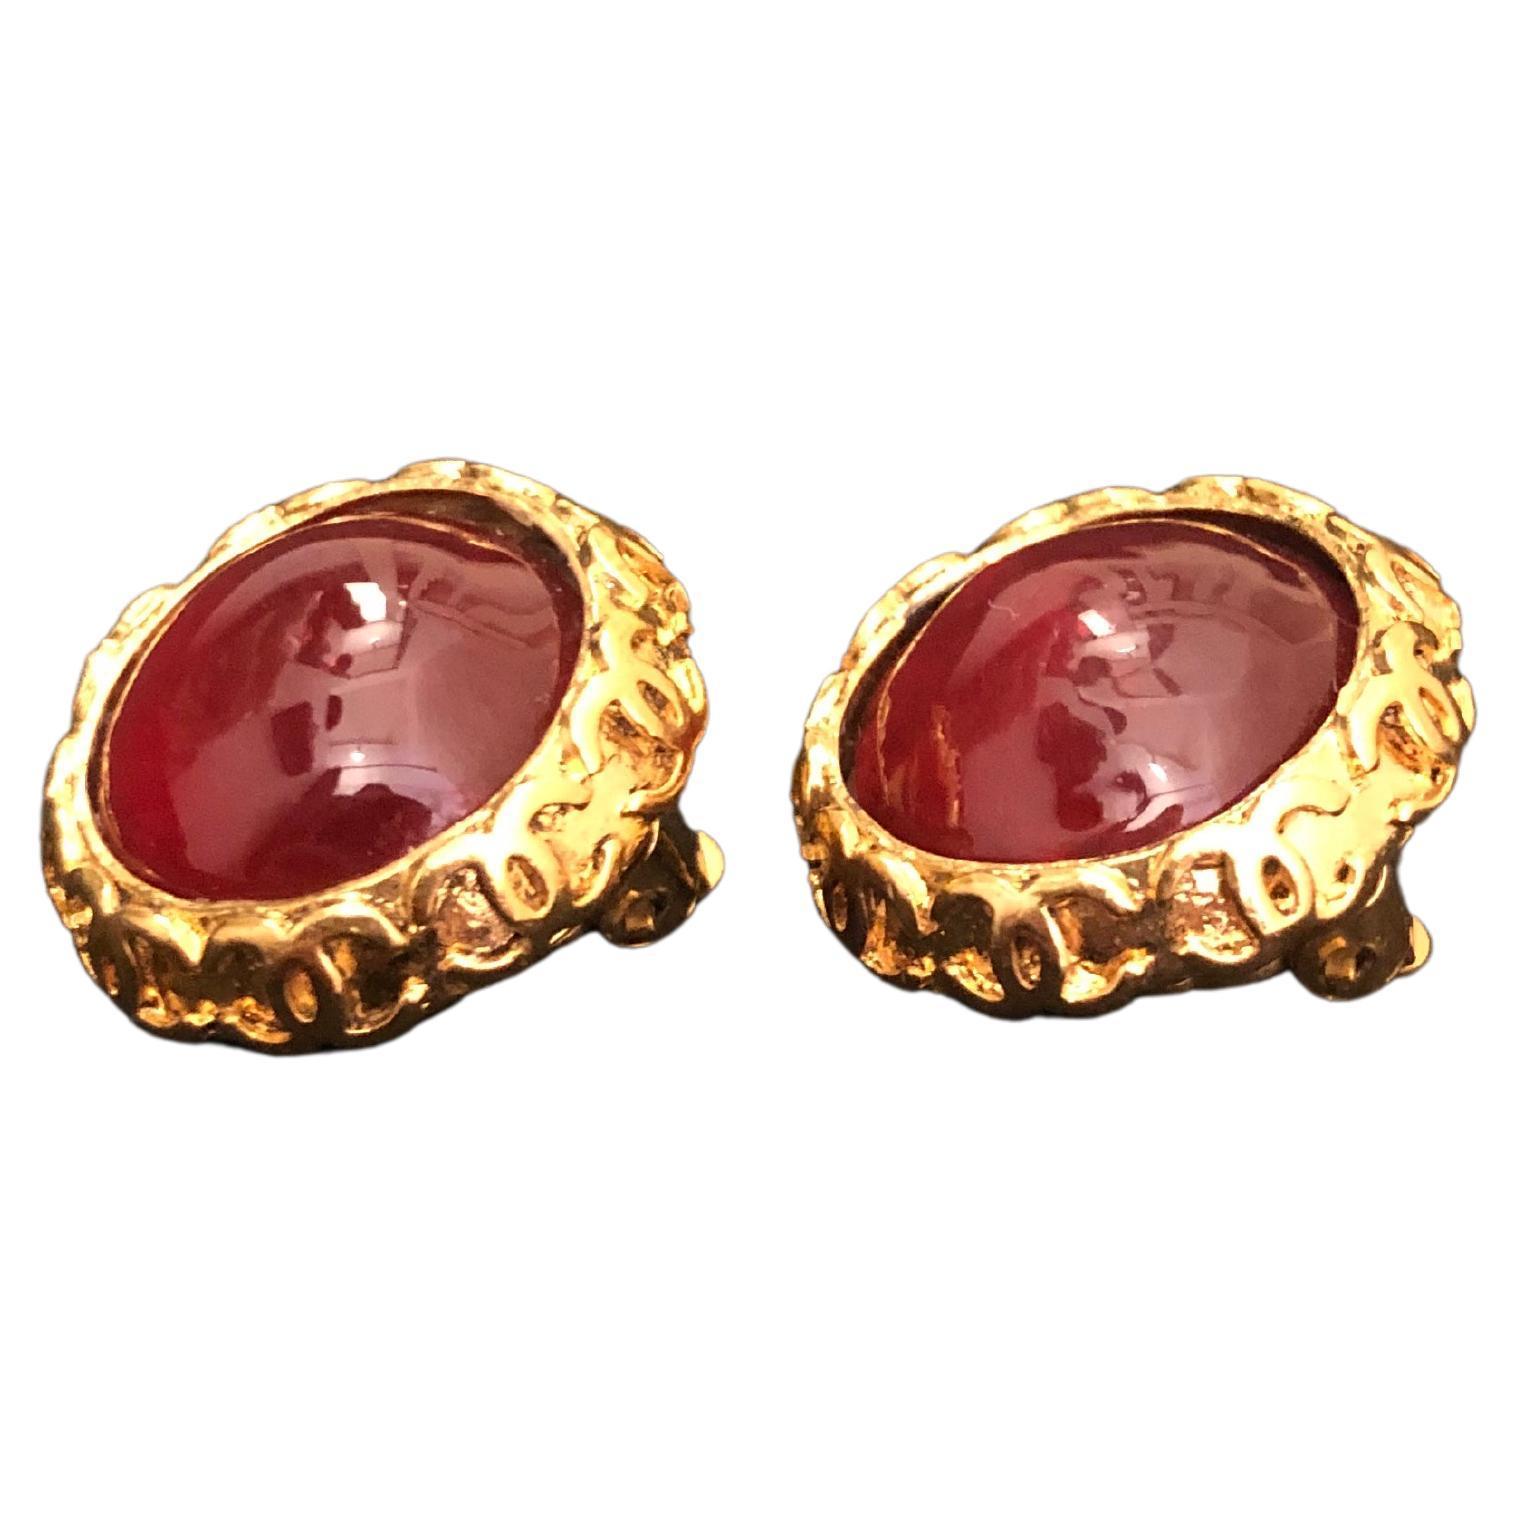 1994 Vintage CHANEL Gold Toned Red Gripoix Earclips Clip On Earrings In Excellent Condition For Sale In Bangkok, TH